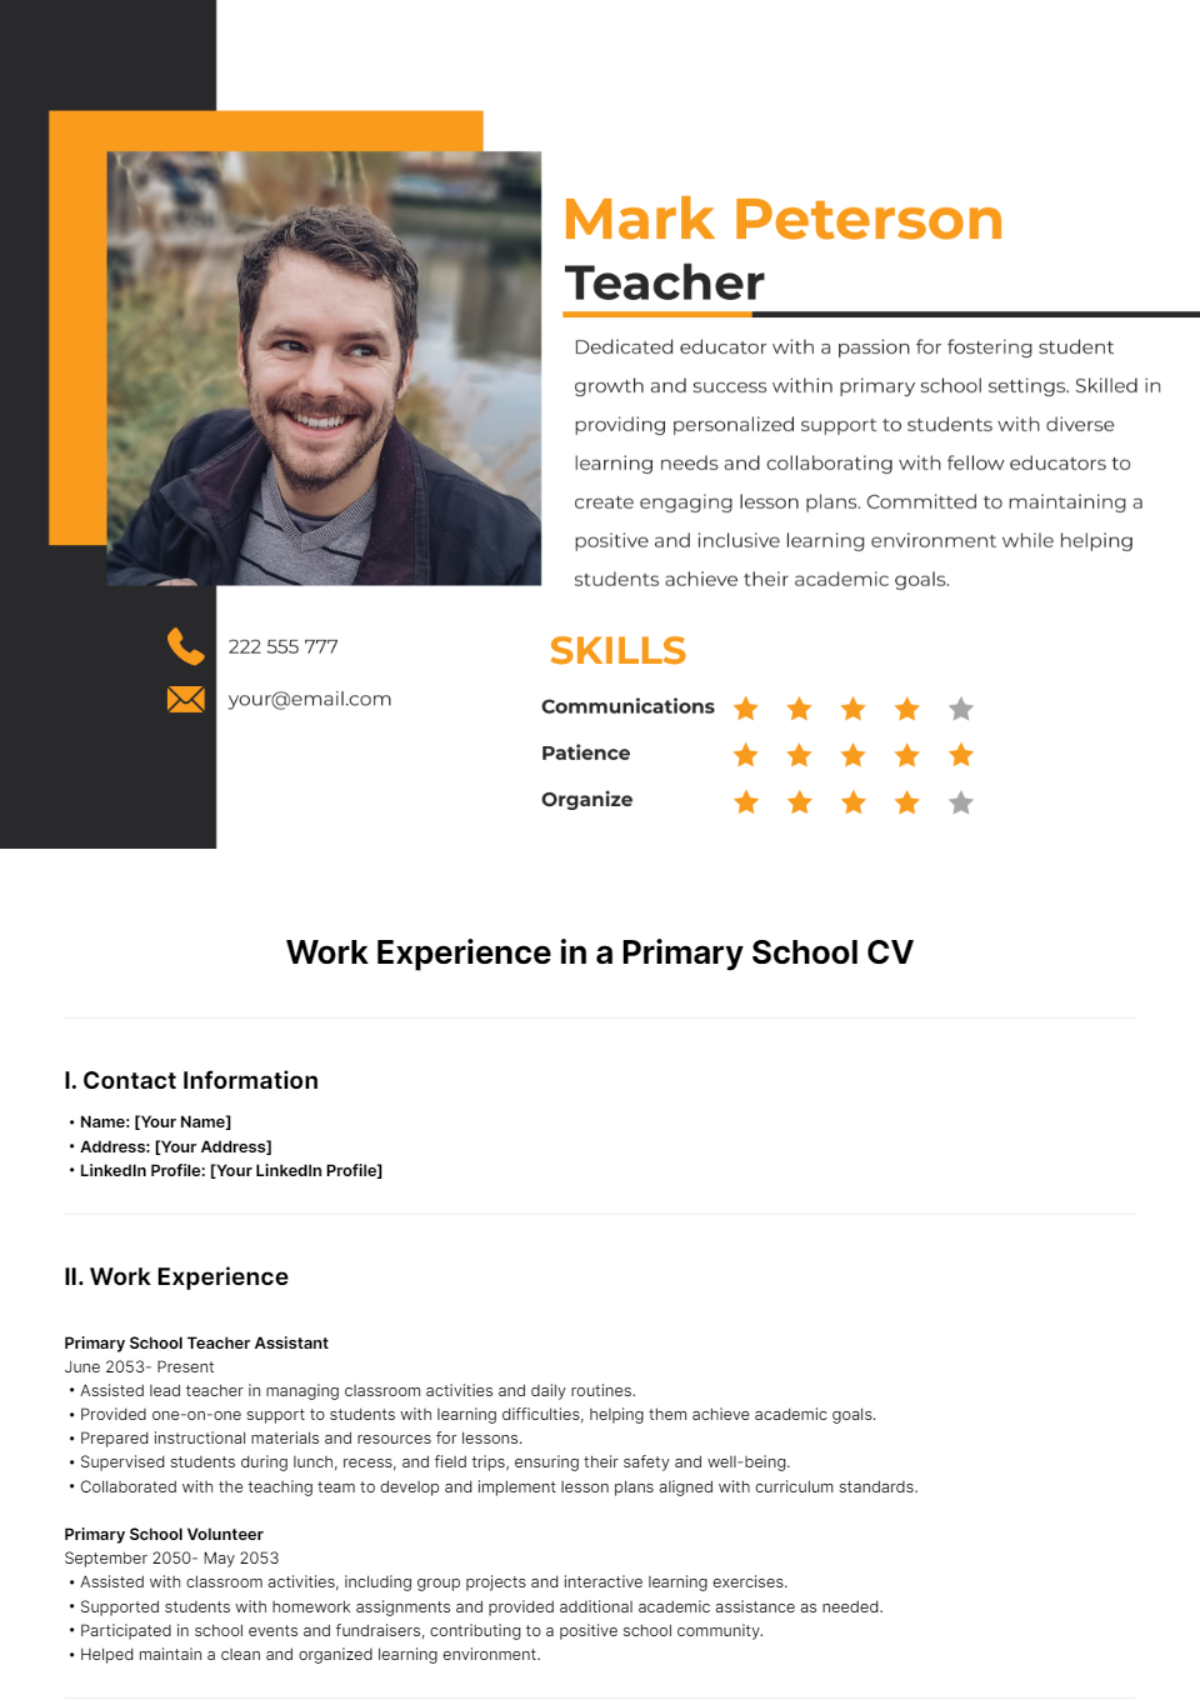 Work Experience in a Primary School CV Template